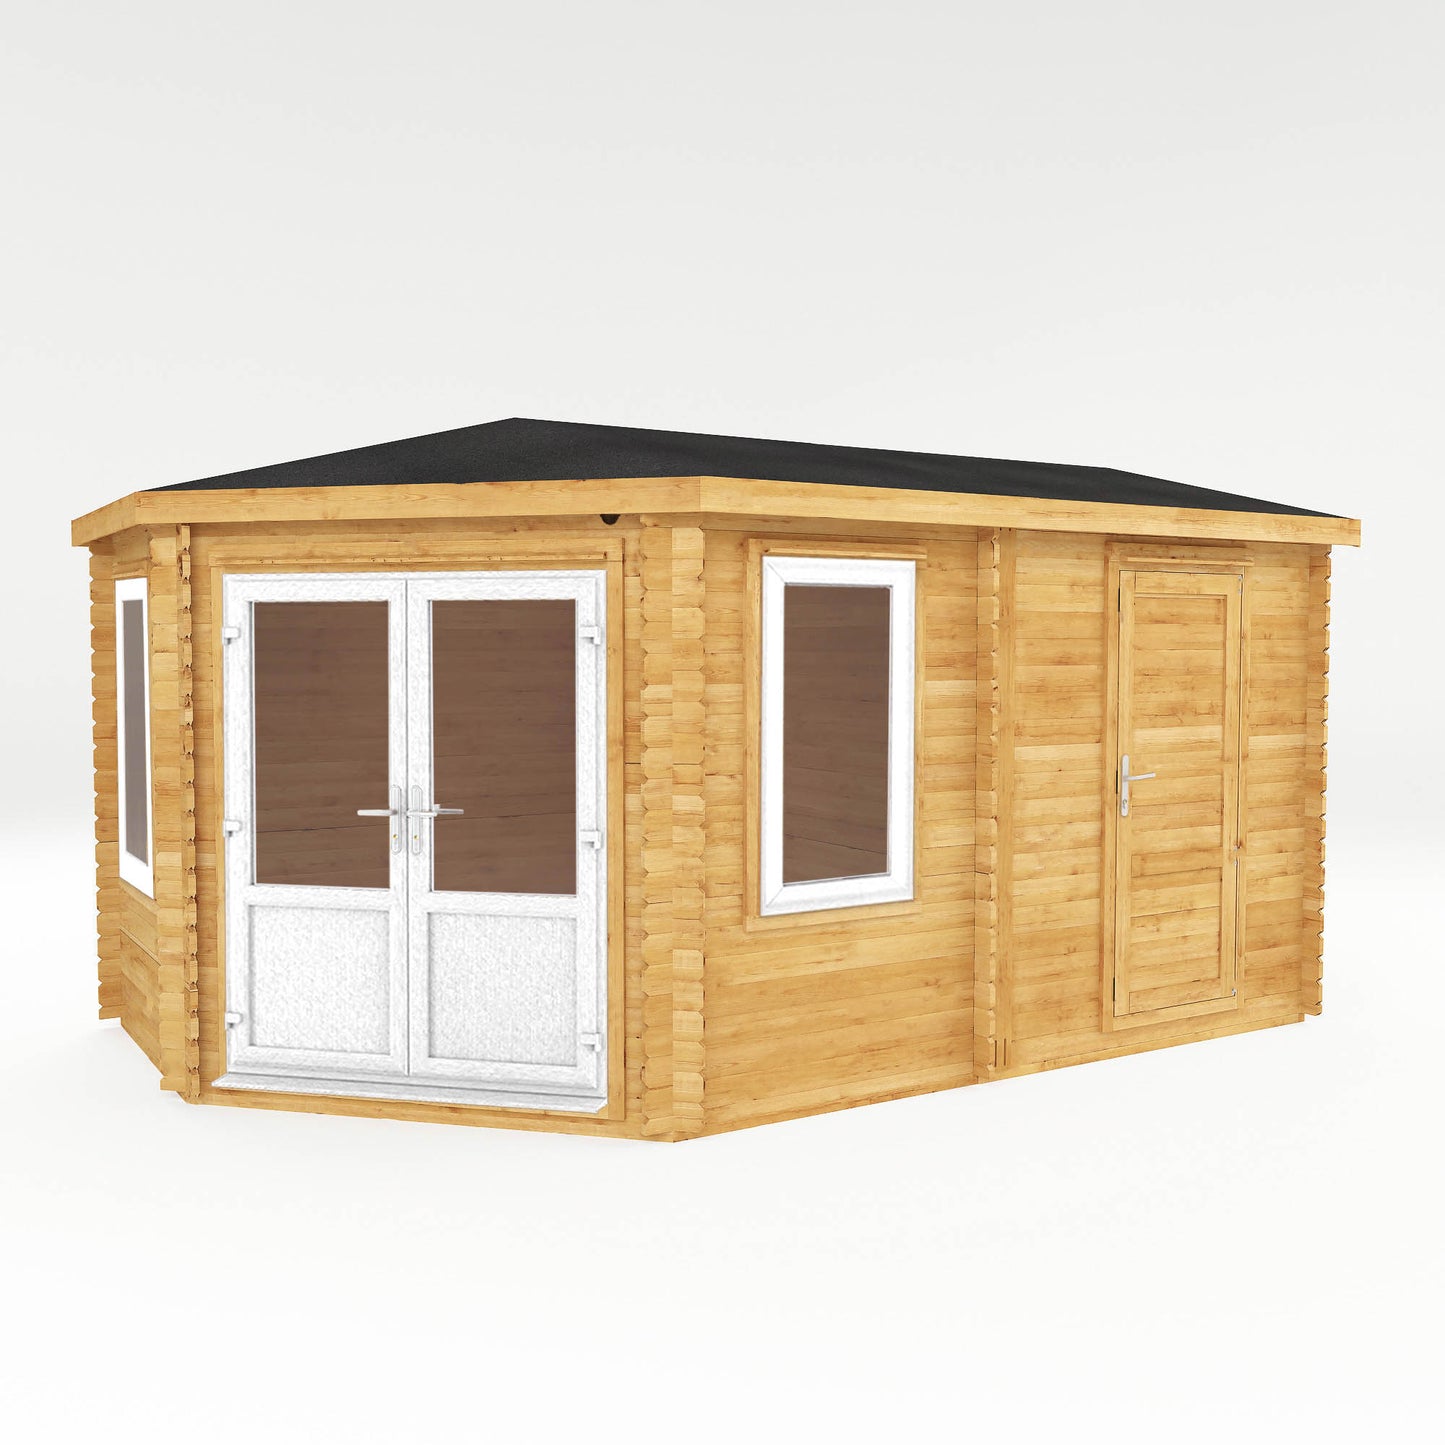 The Goldcrest 5m x 3m Log Cabin with Side Shed and White UPVC